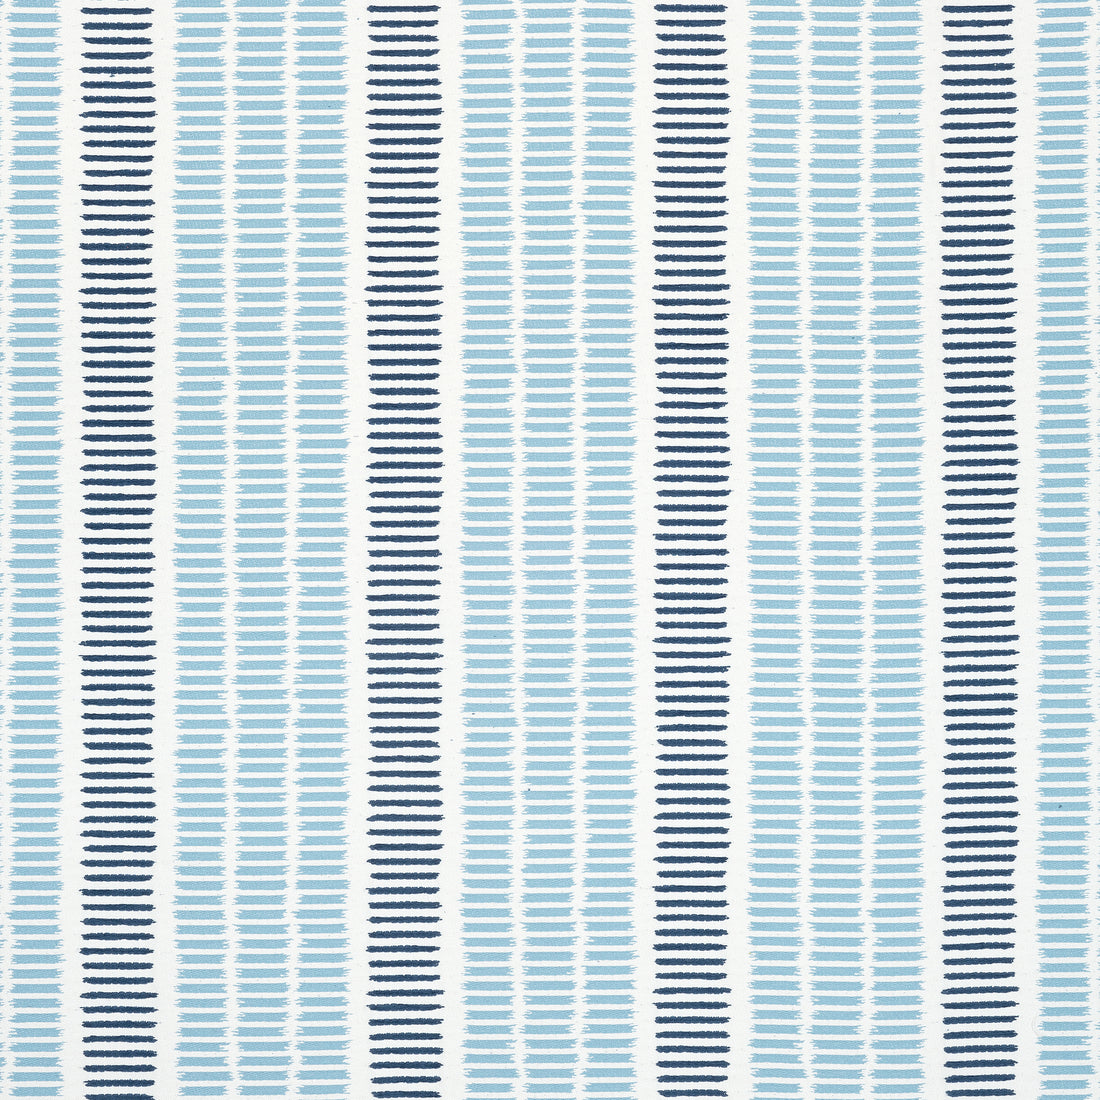 Topsail Stripe fabric in sky and marine color - pattern number W73515 - by Thibaut in the Landmark collection